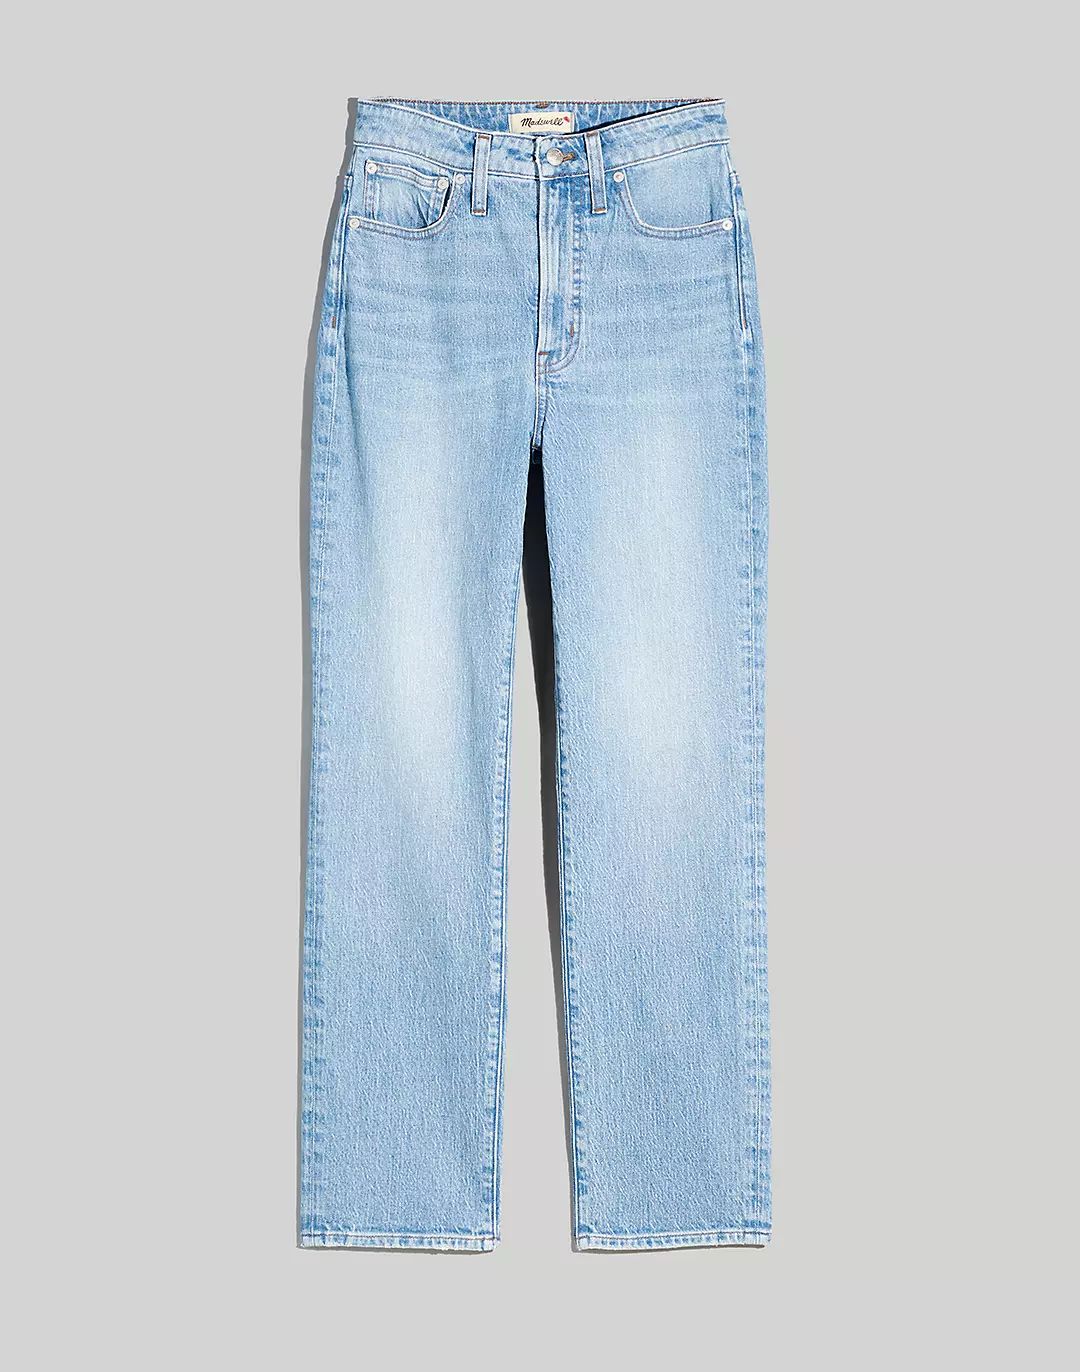 The Curvy Perfect Vintage Straight Jean in Ferman Wash | Madewell